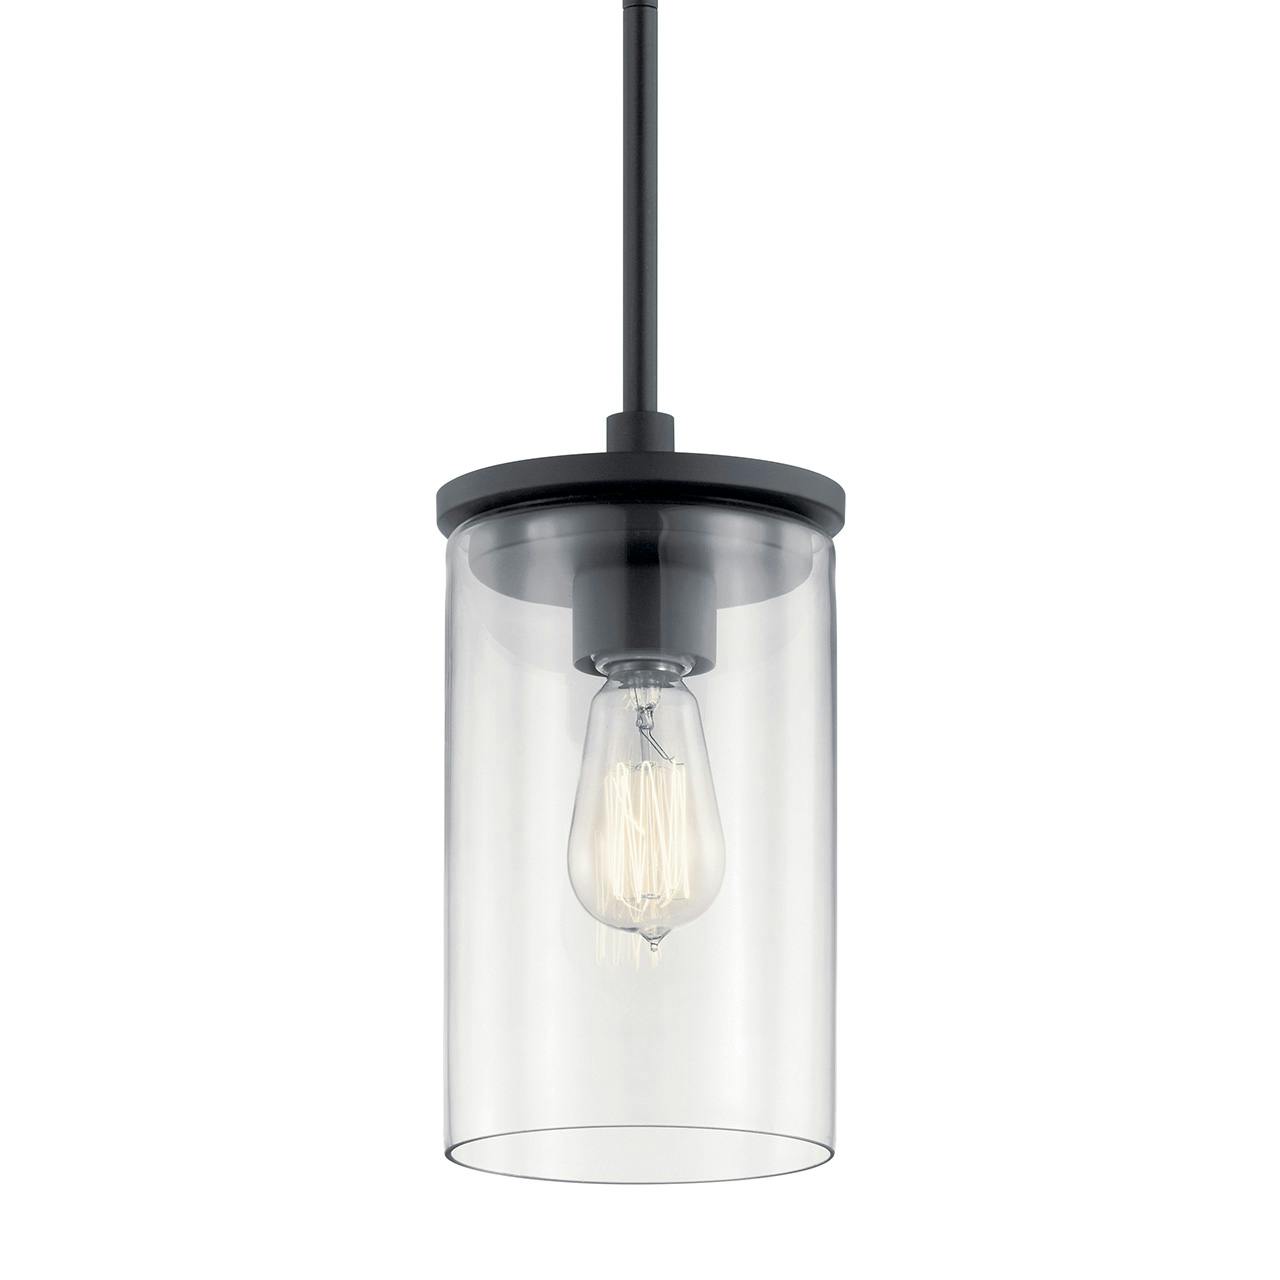 Crosby 1 Light Mini Pendant Black without the canopy on a white background